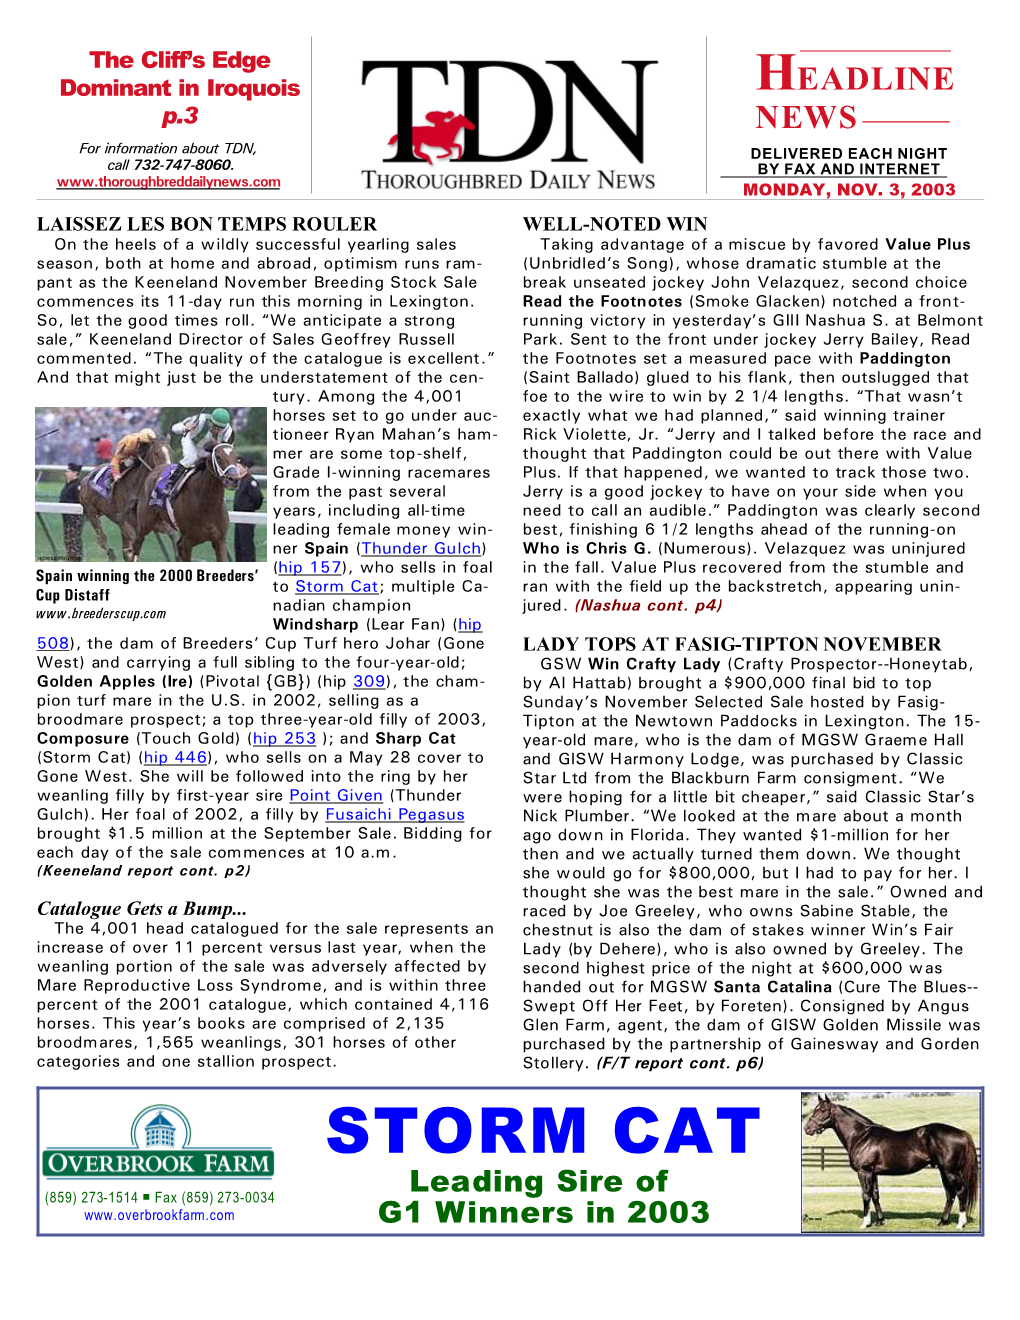 Storm Cat; Multiple Ca- Ran with the Field up the Backstretch, Appearing Unin- Cup Distaff Nadian Champion Jured